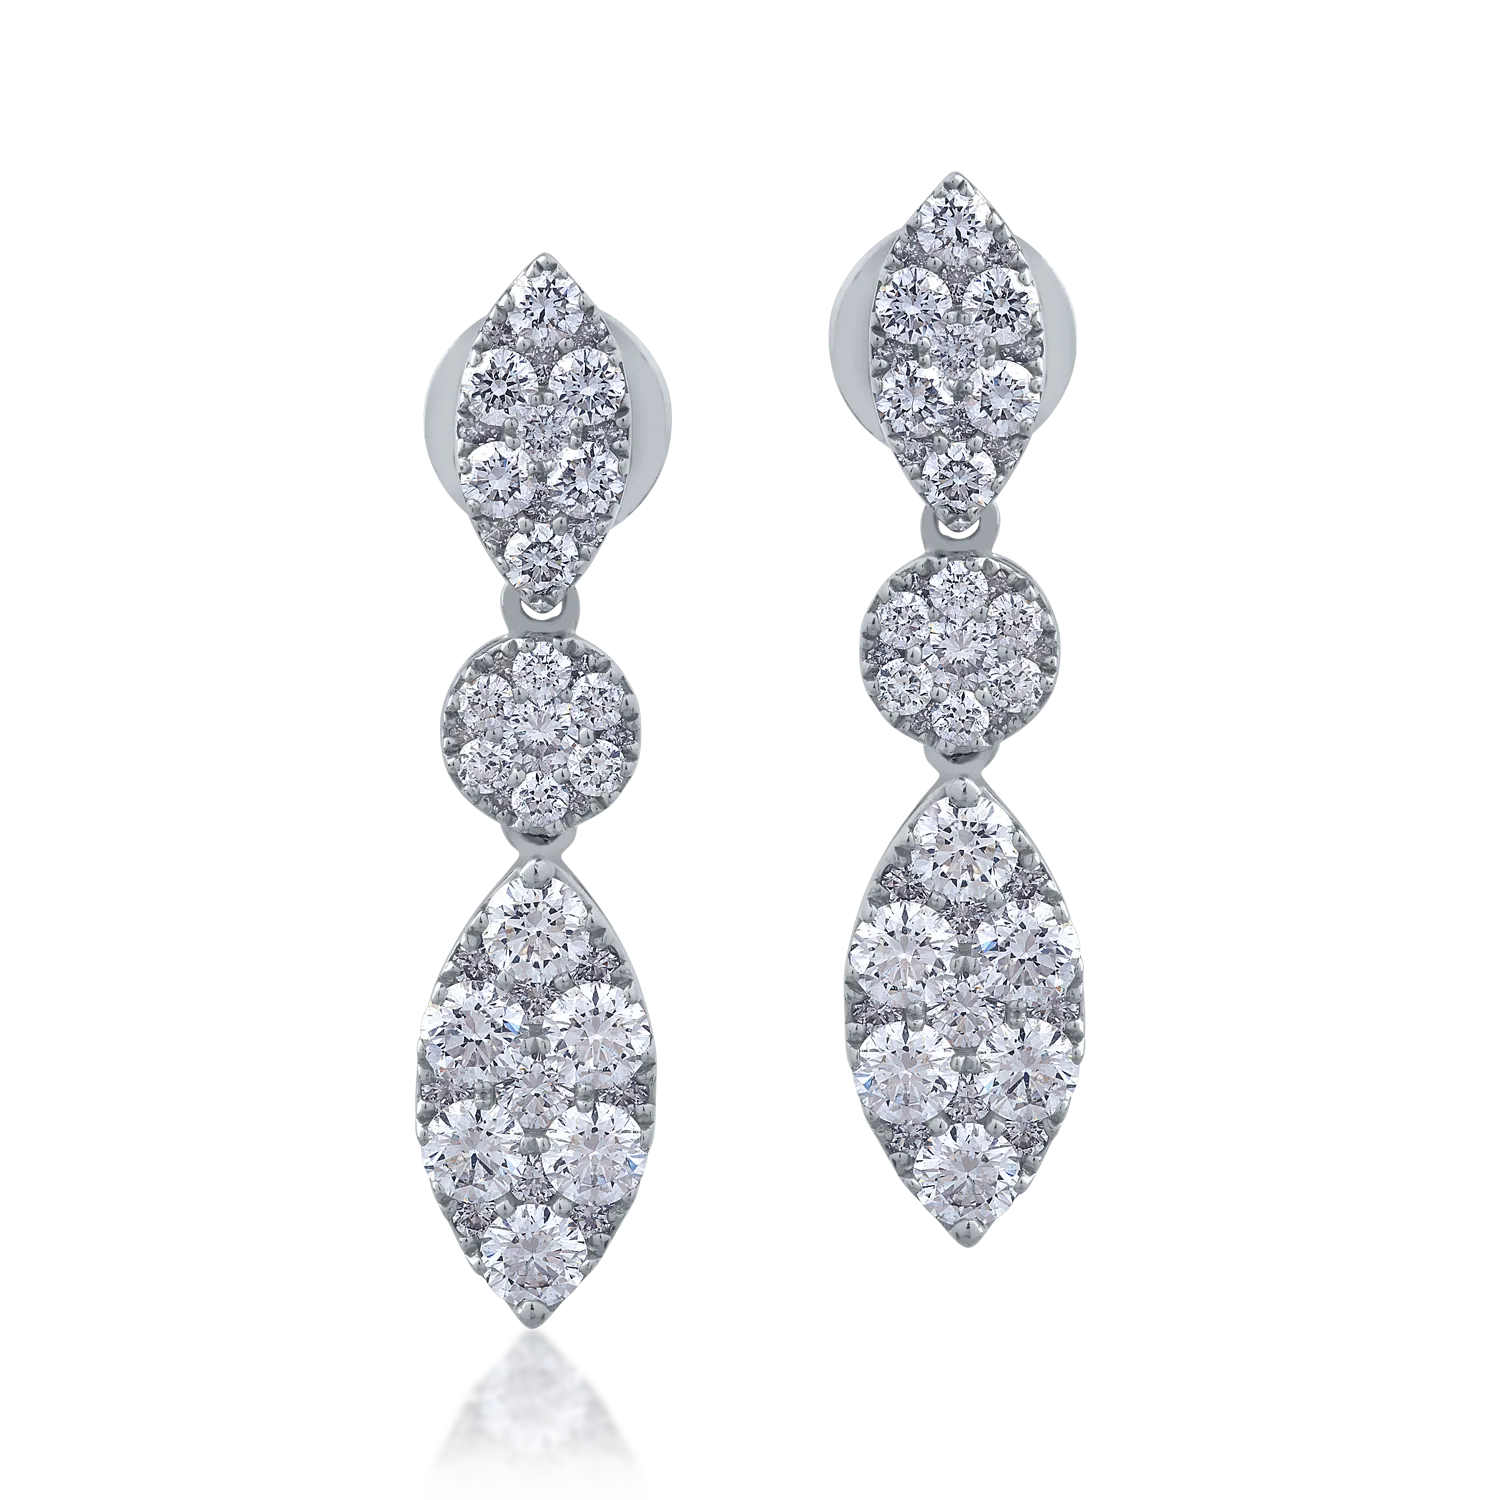 18K white gold earrings with 1.97ct diamonds